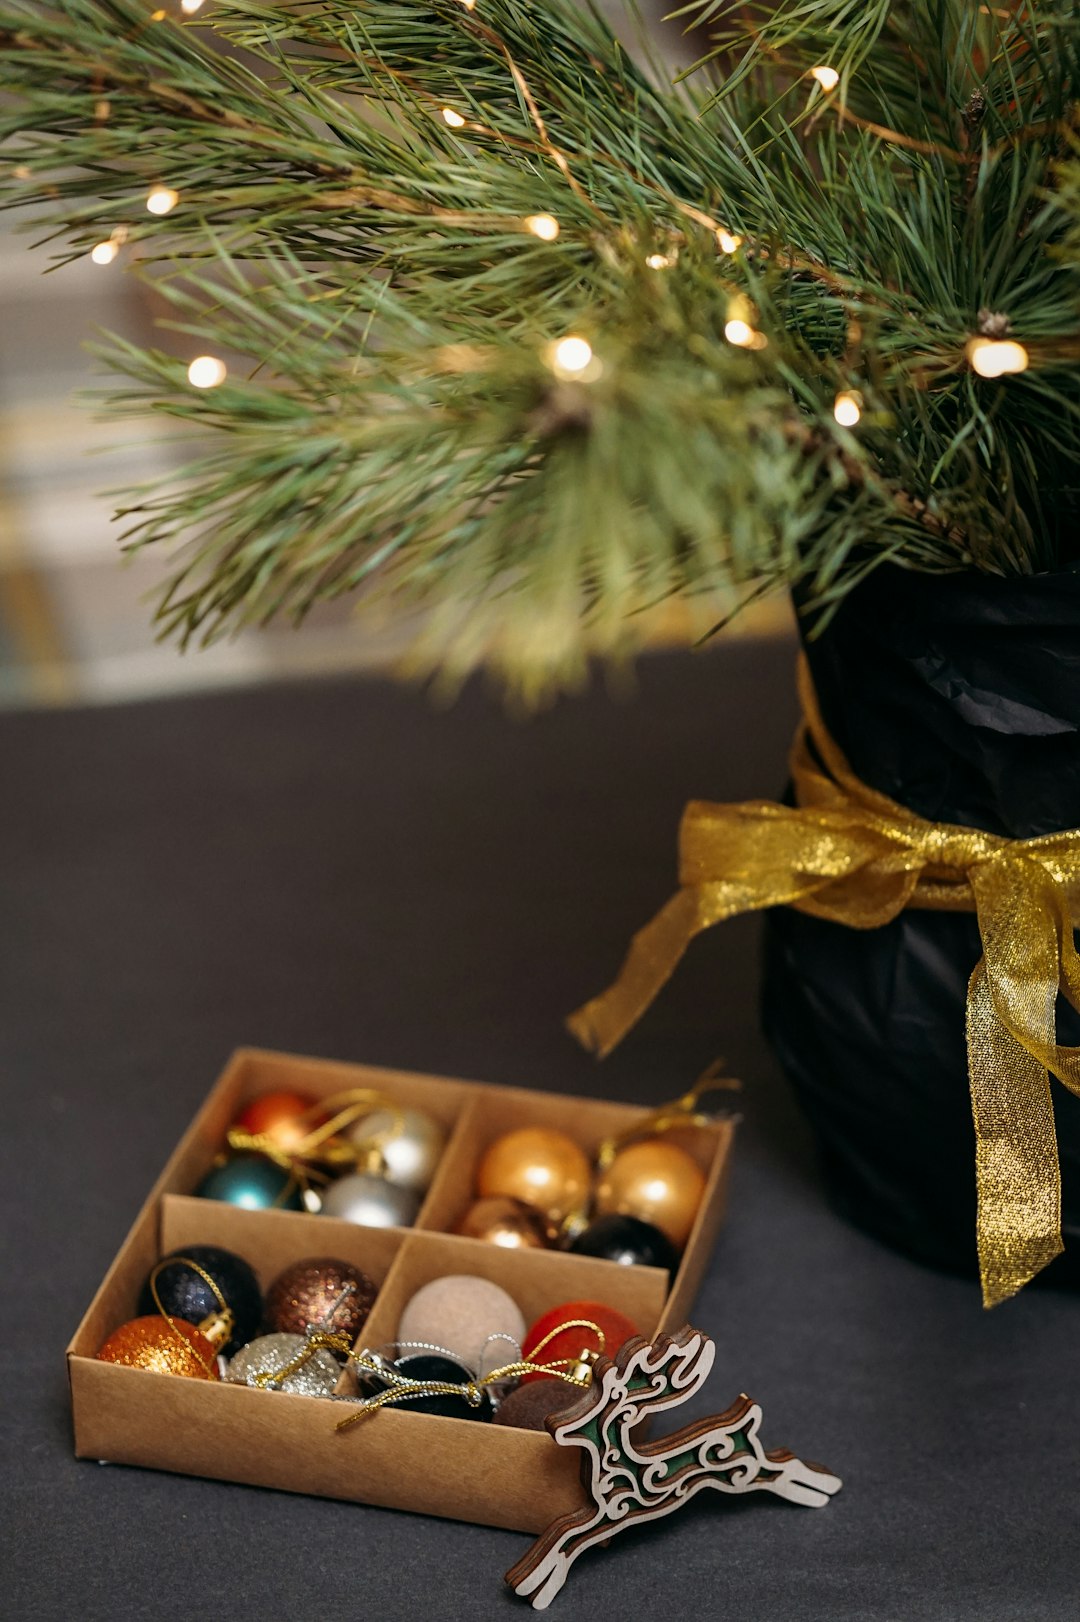 brown and white baubles on brown wooden box